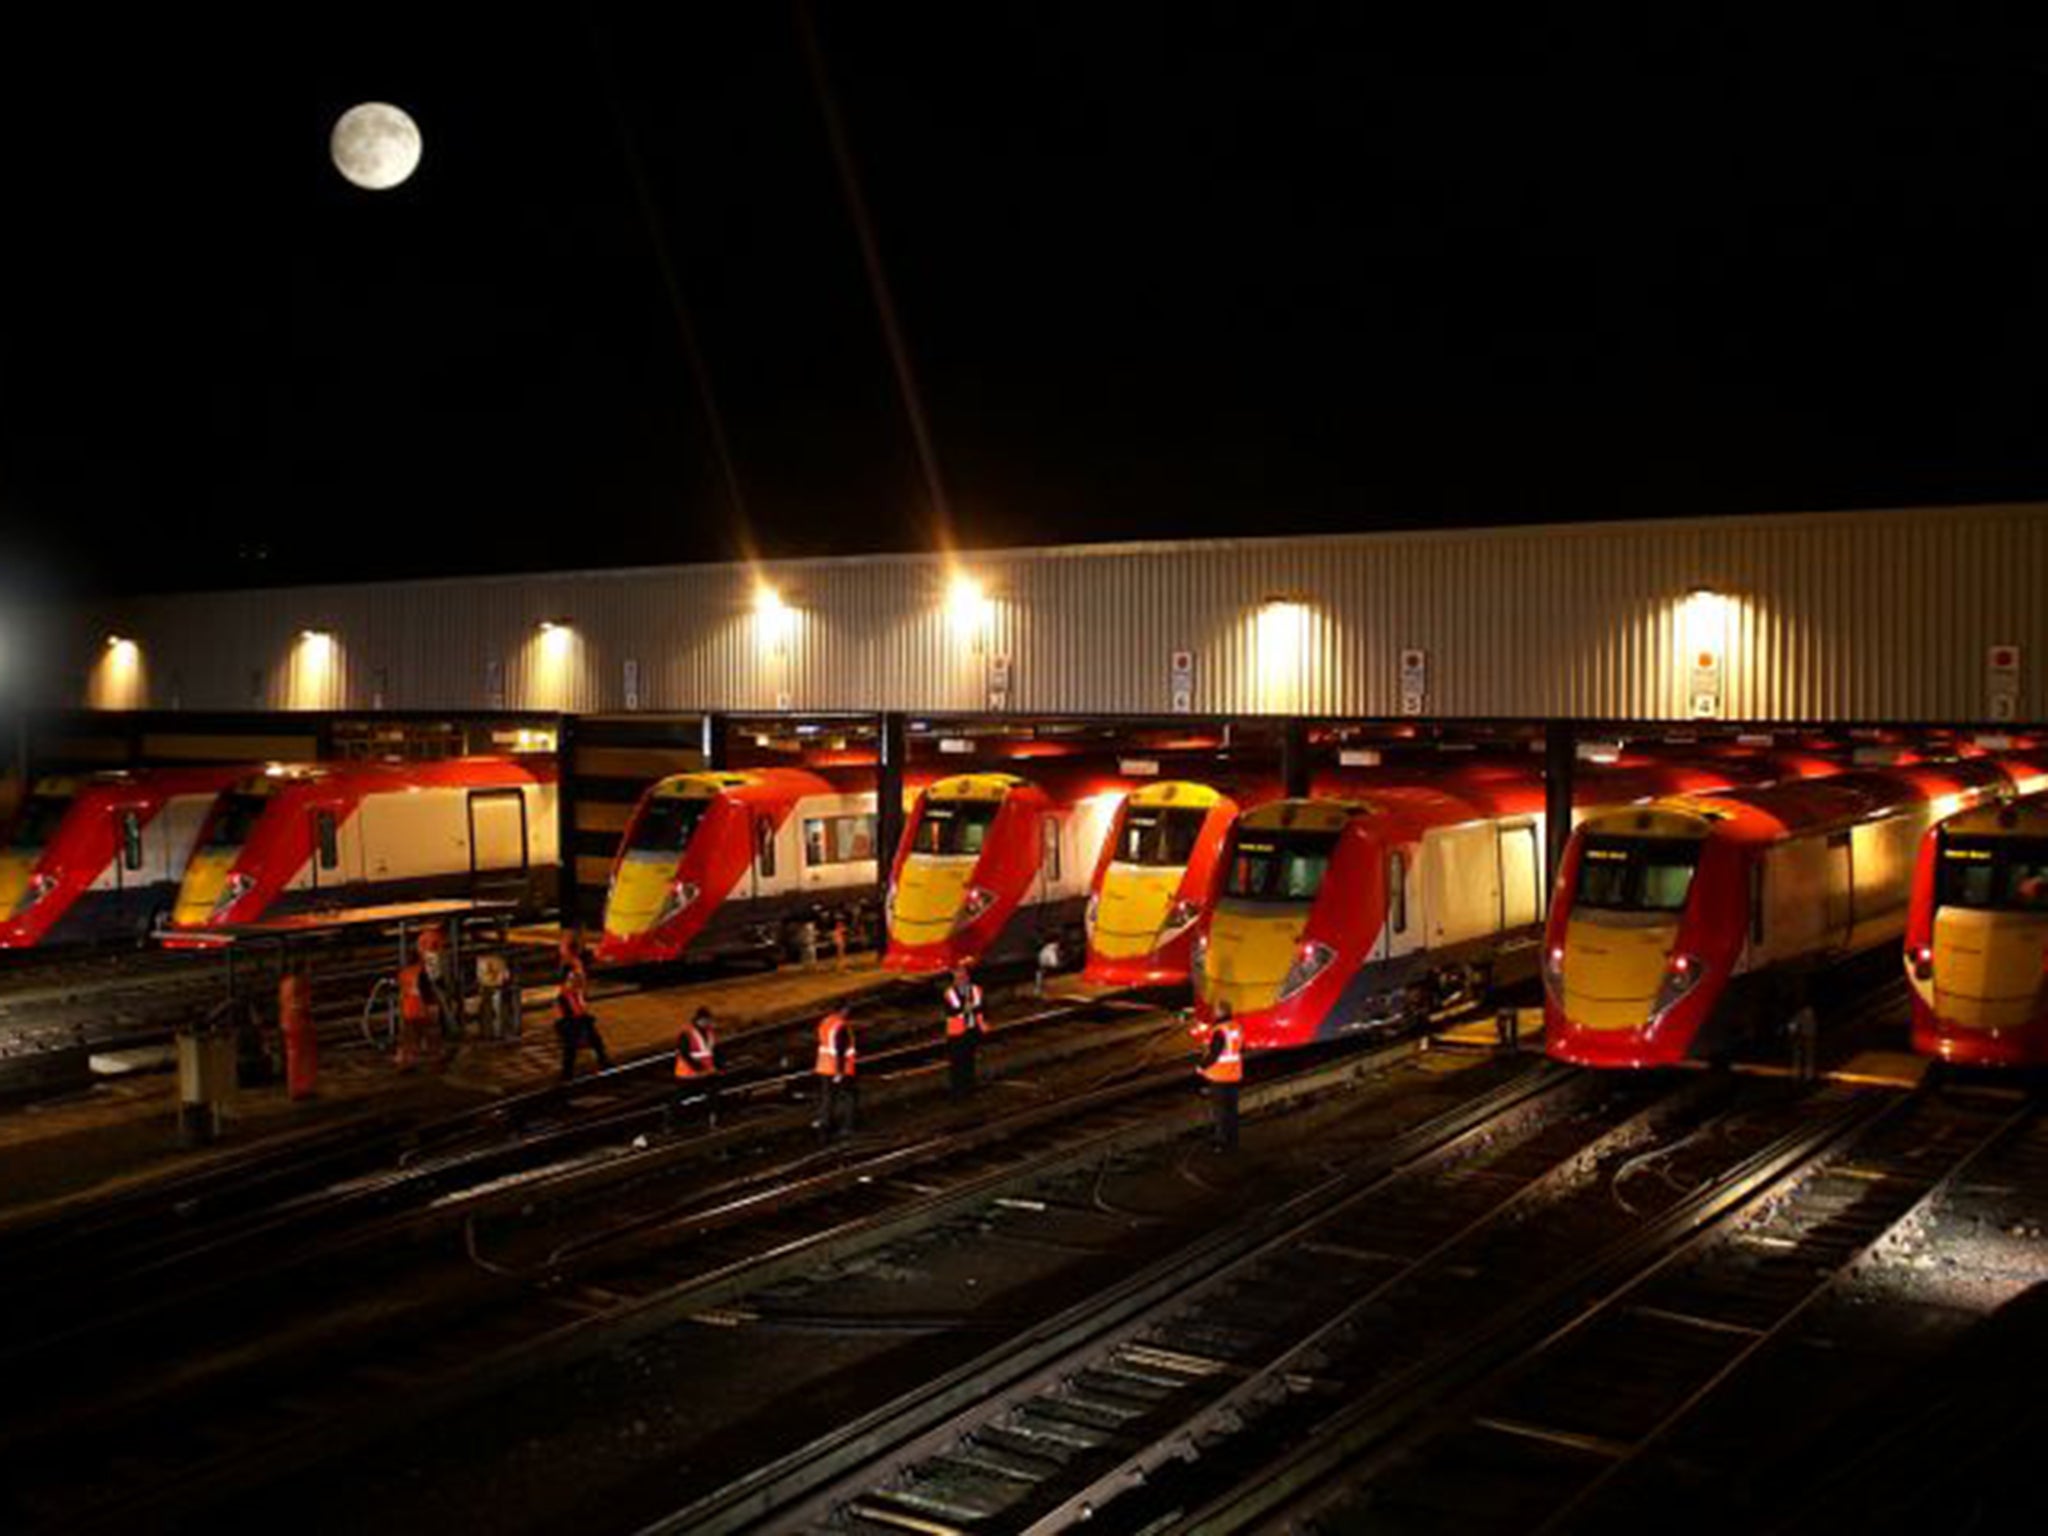 Thirty-eight Gatwick Express services a day are being cancelled, meaning passengers will have to wait up to 30 minutes